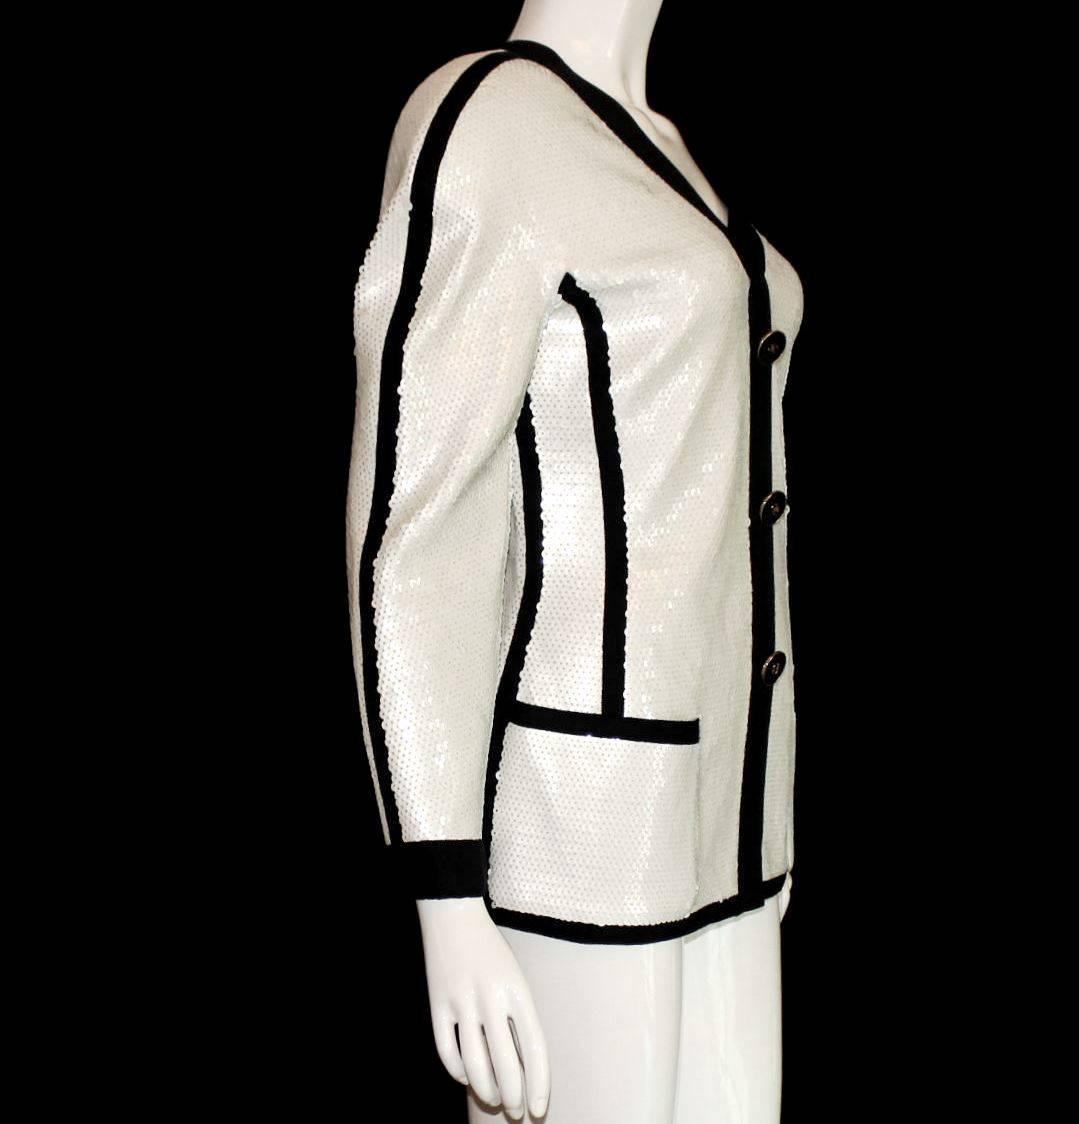 An extremely rare Chanel jacket from the early 1990s
Seen on Vogue Editor Anna Wintour
Part of the Exhibition in the Metropolitan Museum in NY in 2005
White Sequin Jacket with black trimming
Closes with a hidden zip in front
Decorative black CC logo